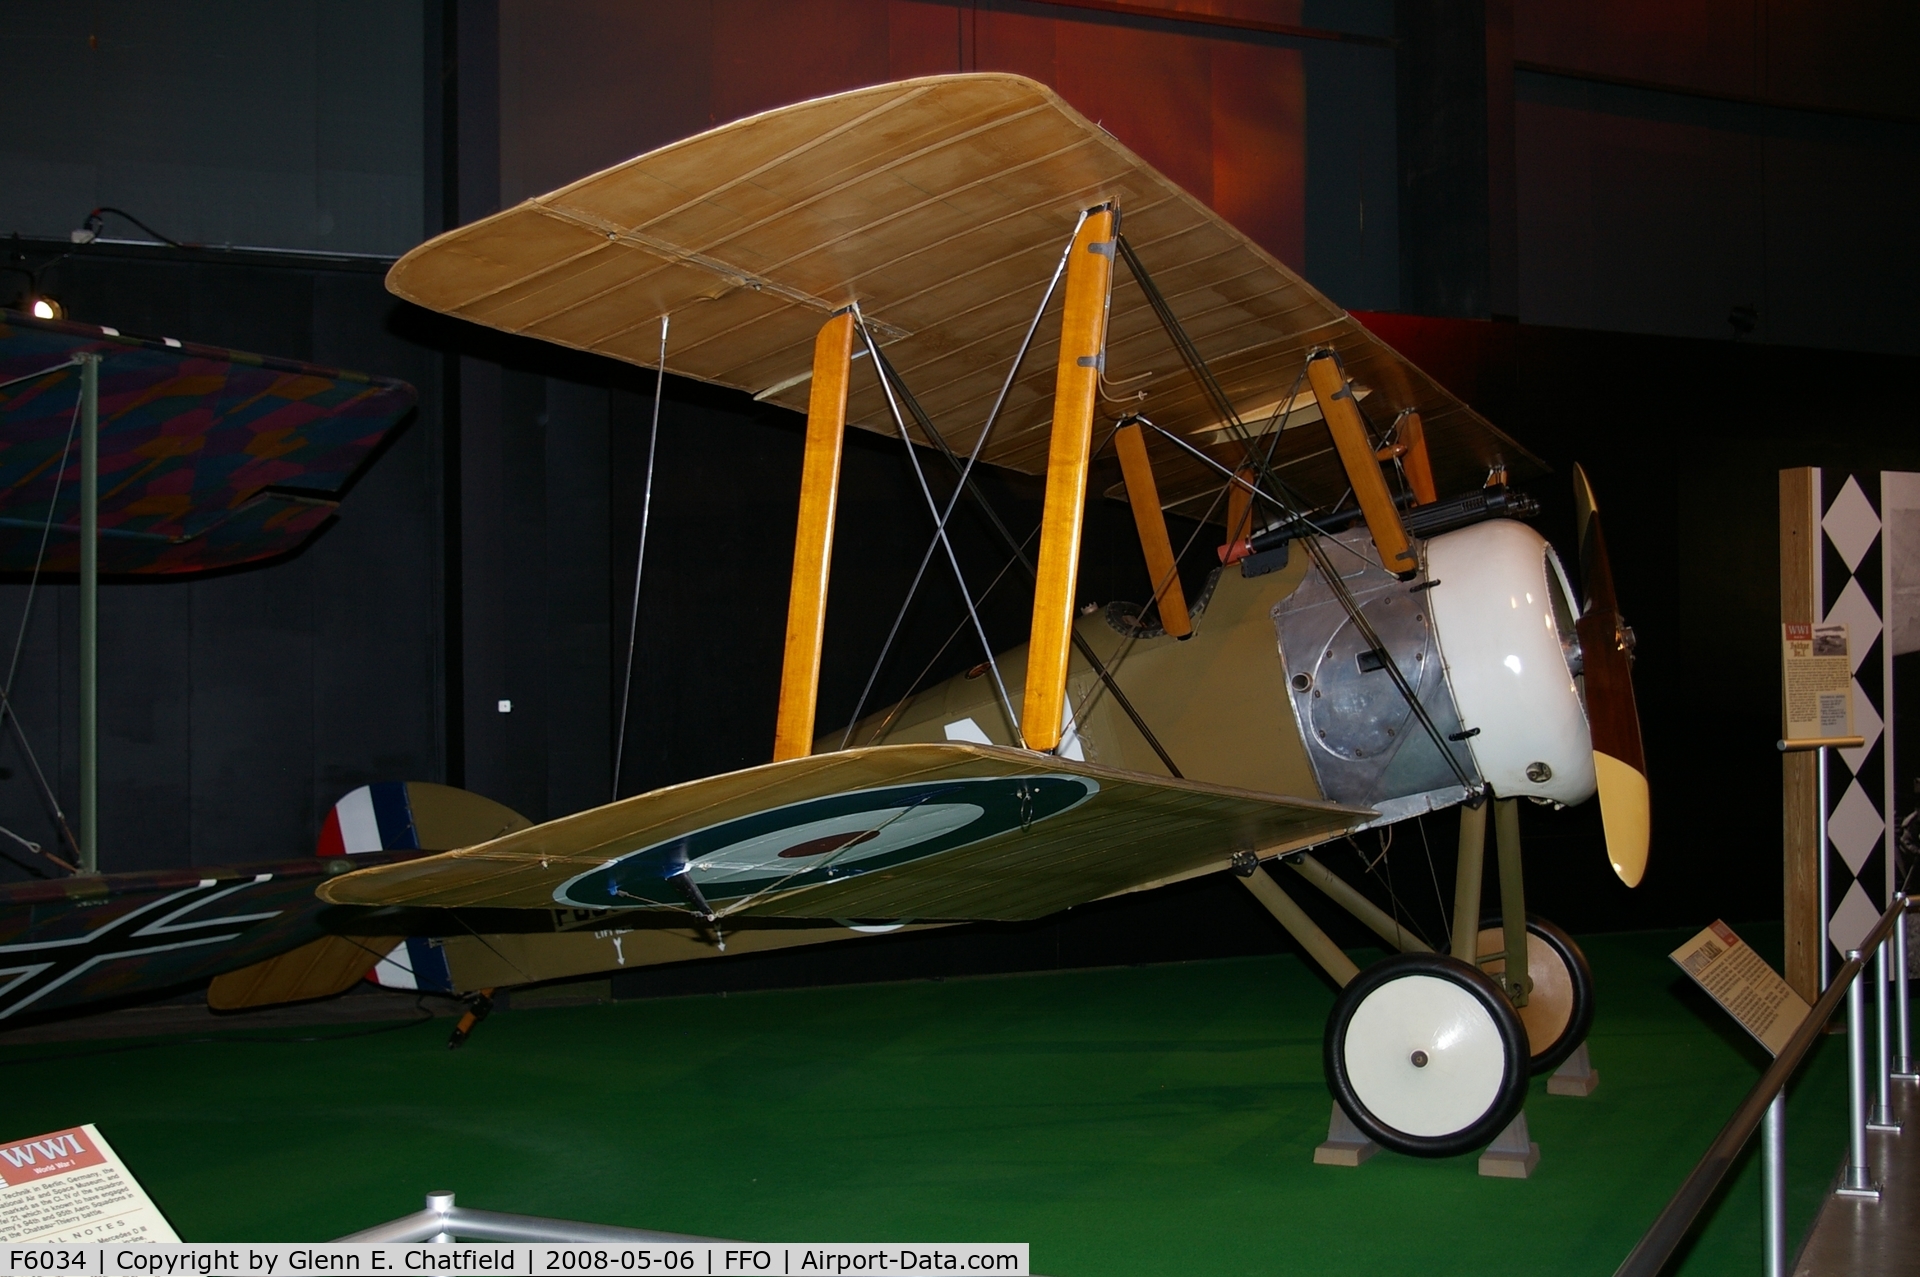 F6034, 1974 Sopwith F.1 Camel C/N Not found F6034, Camel F.1 Replica built by the National Museum of the U.S. Air Force